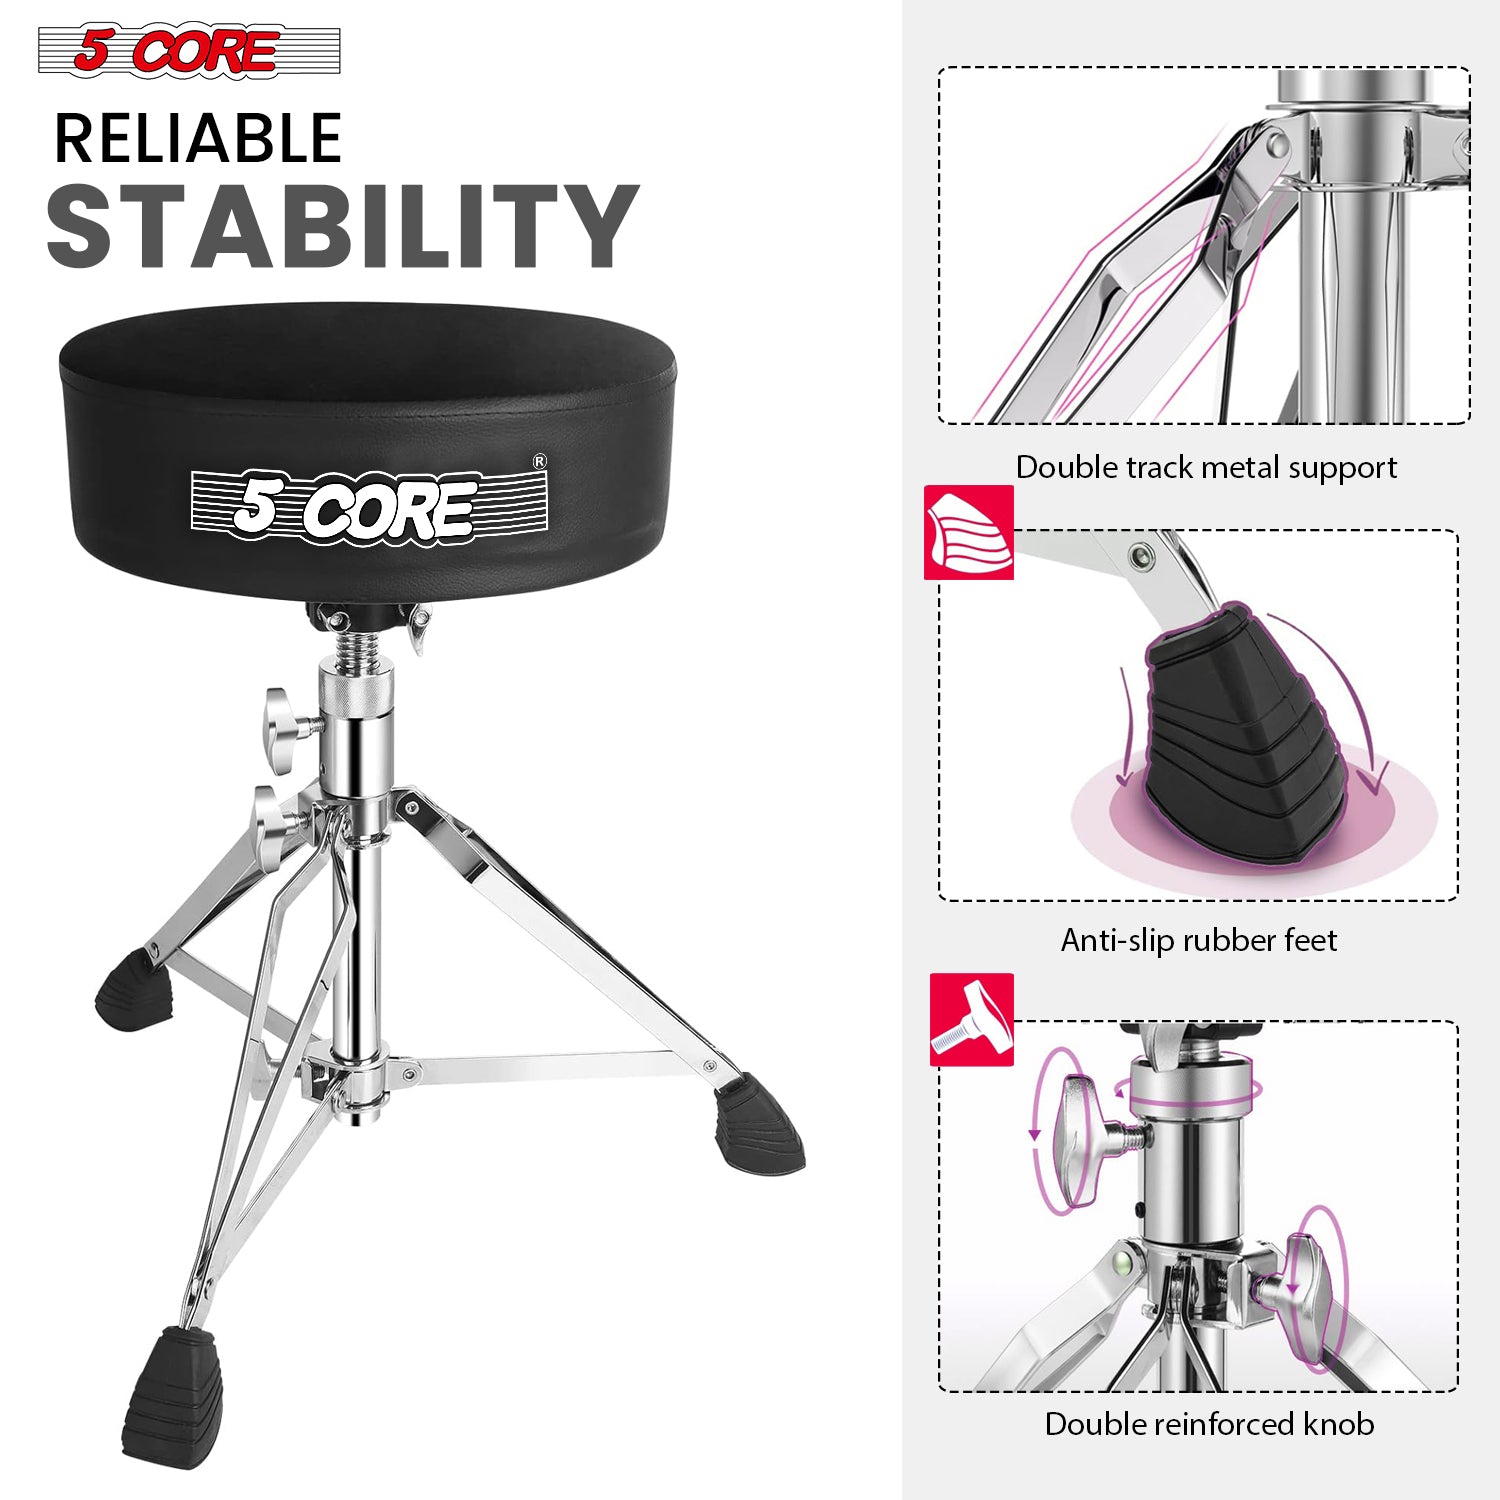 Height-adjustable music DJ chair with heavy-duty construction for durability